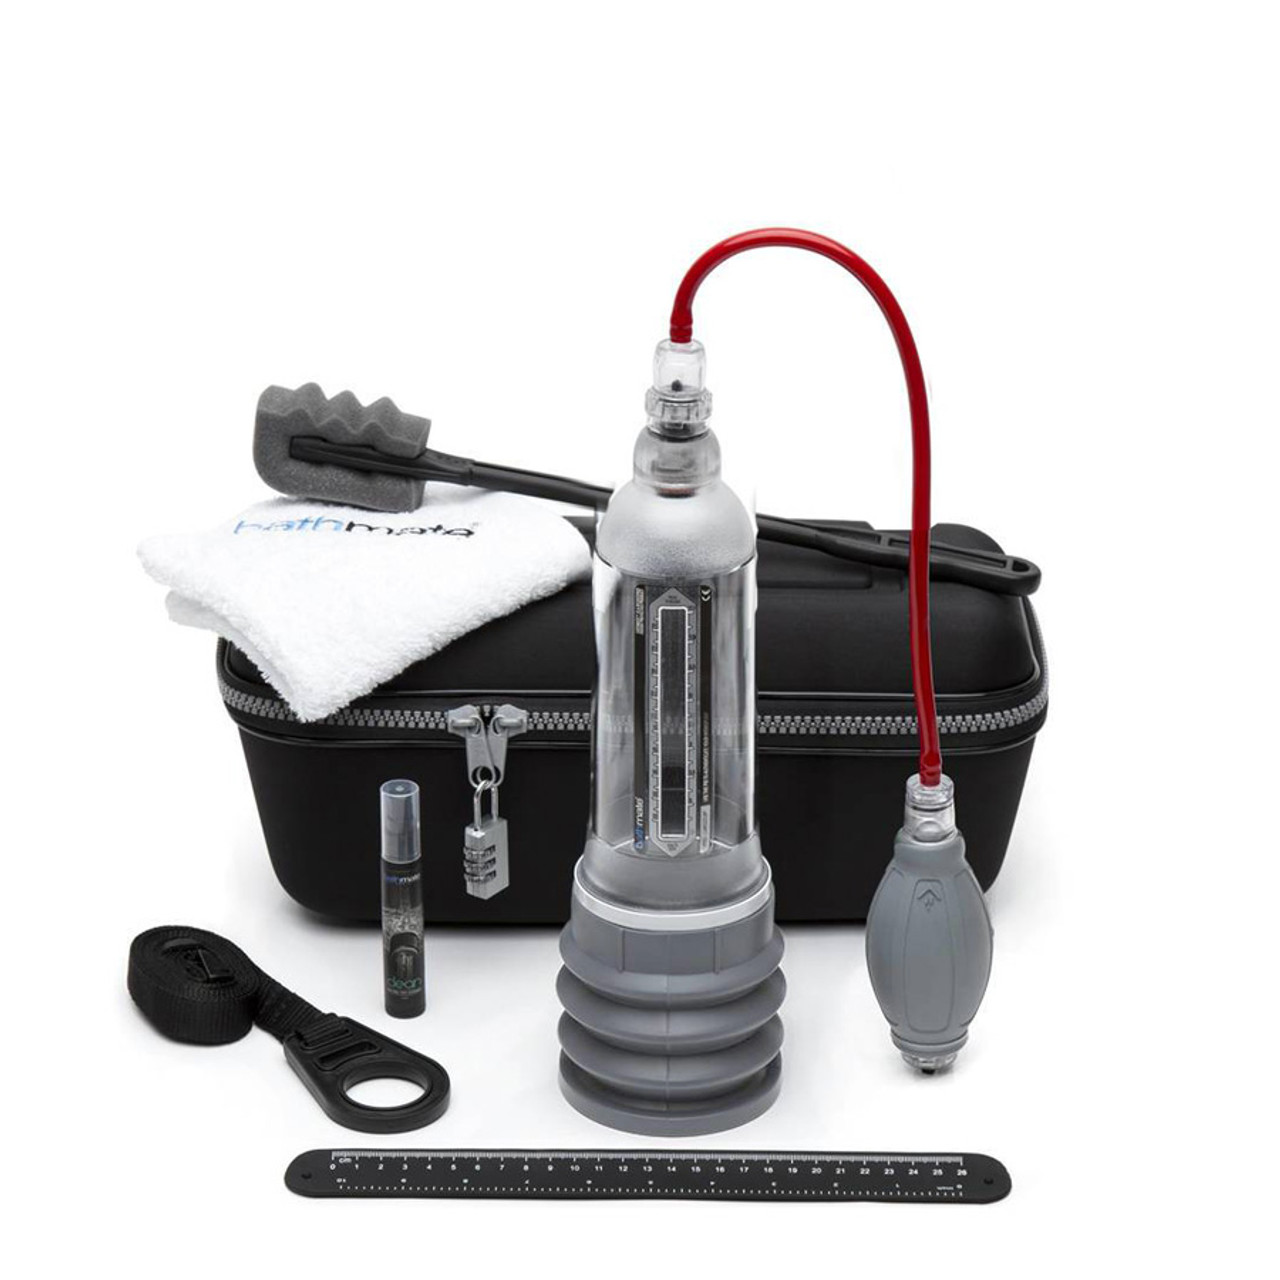 Buy the Bathmate HydroXtreme5 Hydropump Penis Pump Kit in Crystal Clear Xtreme picture